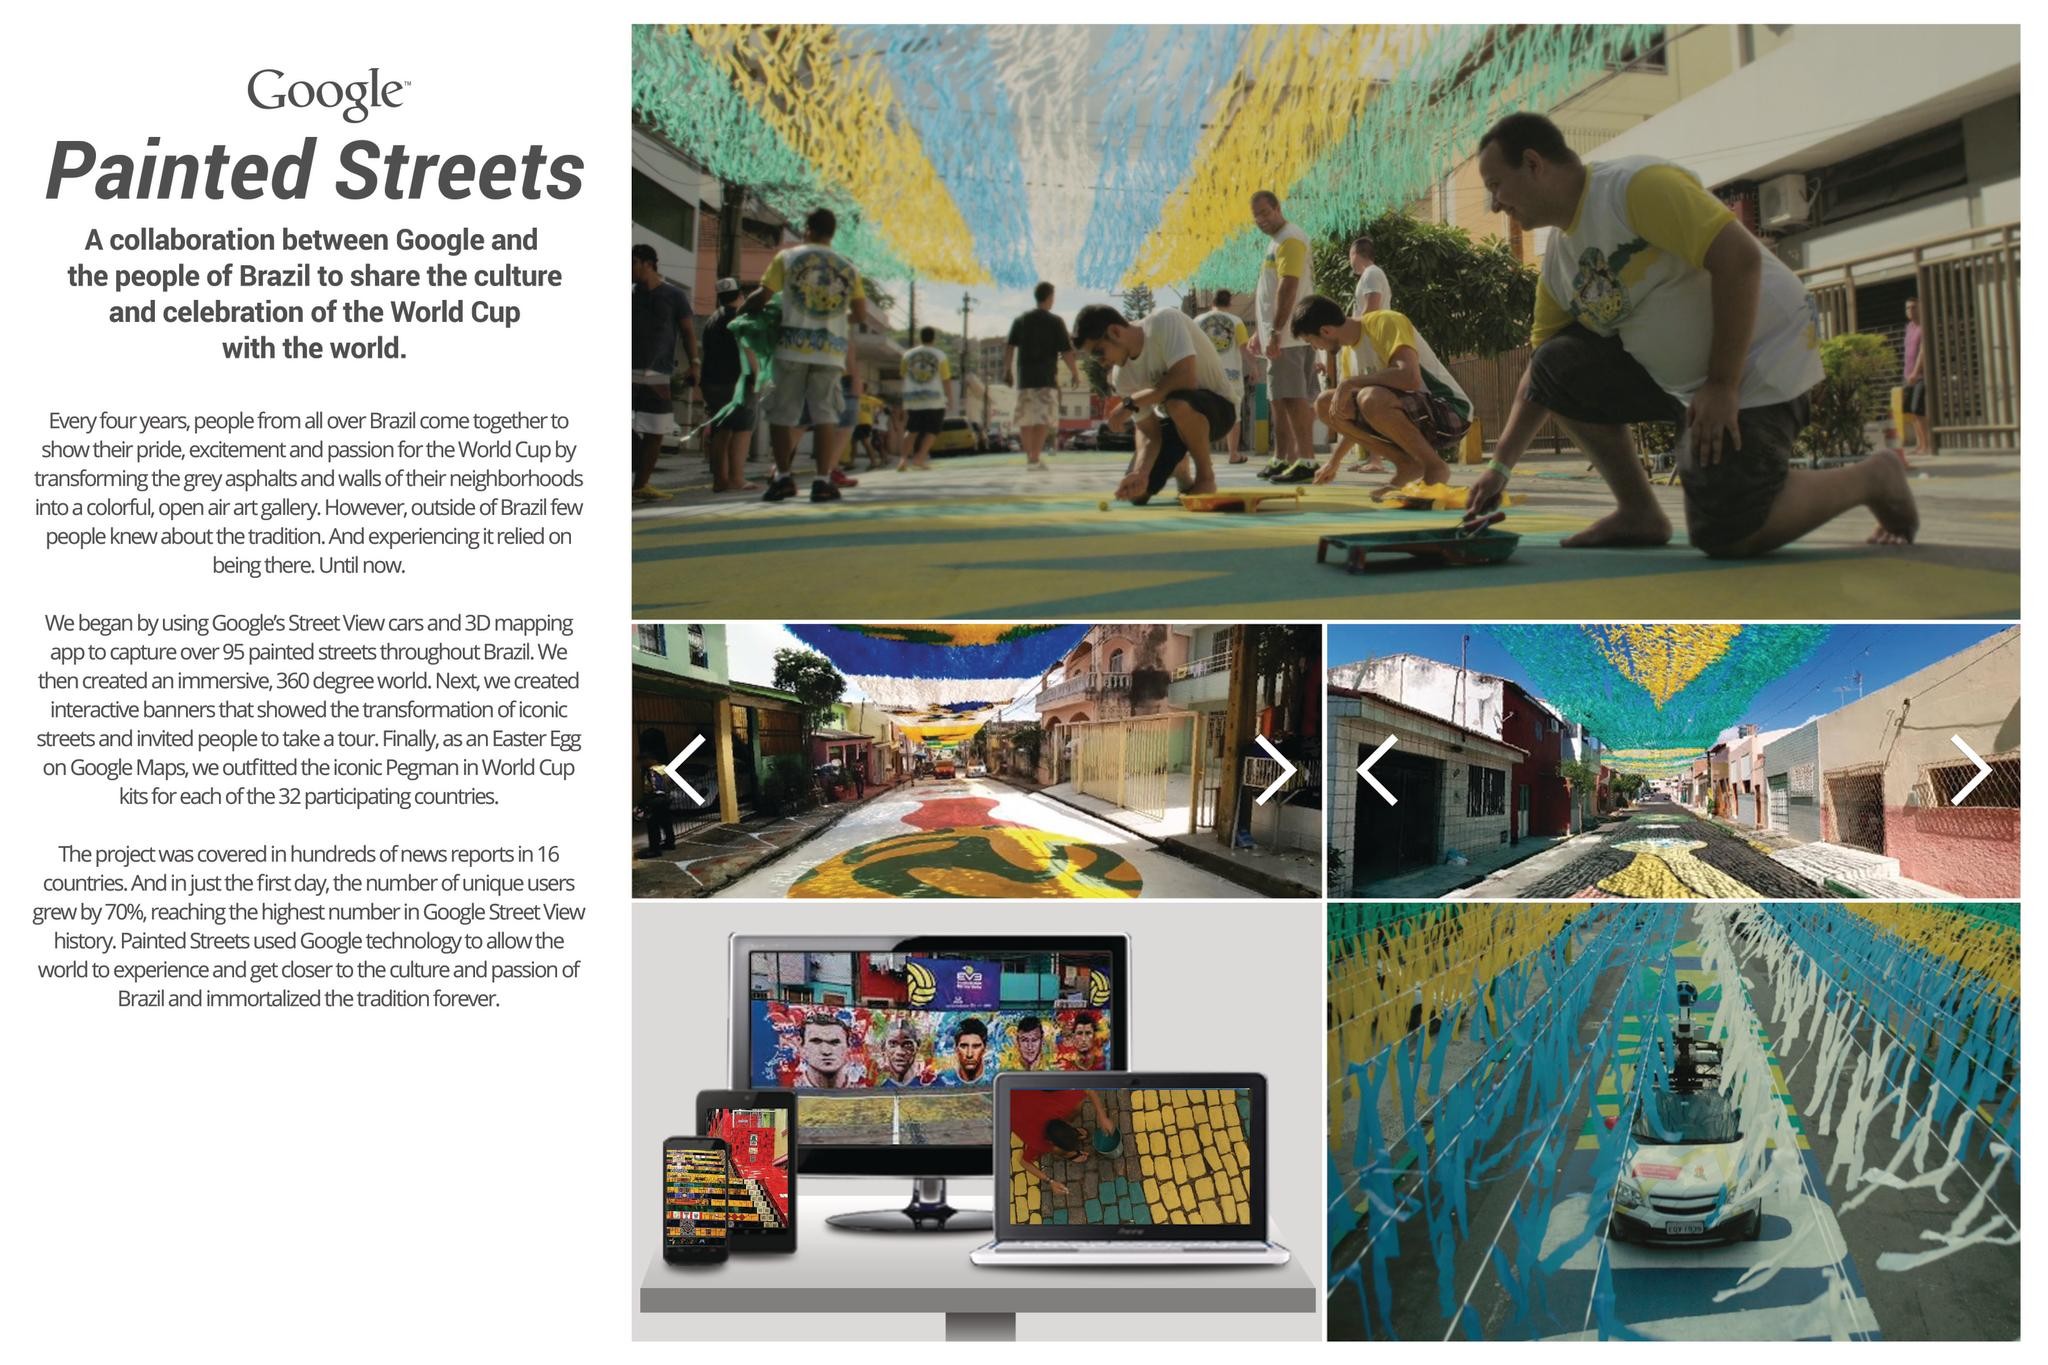 GOOGLE PAINTED STREETS